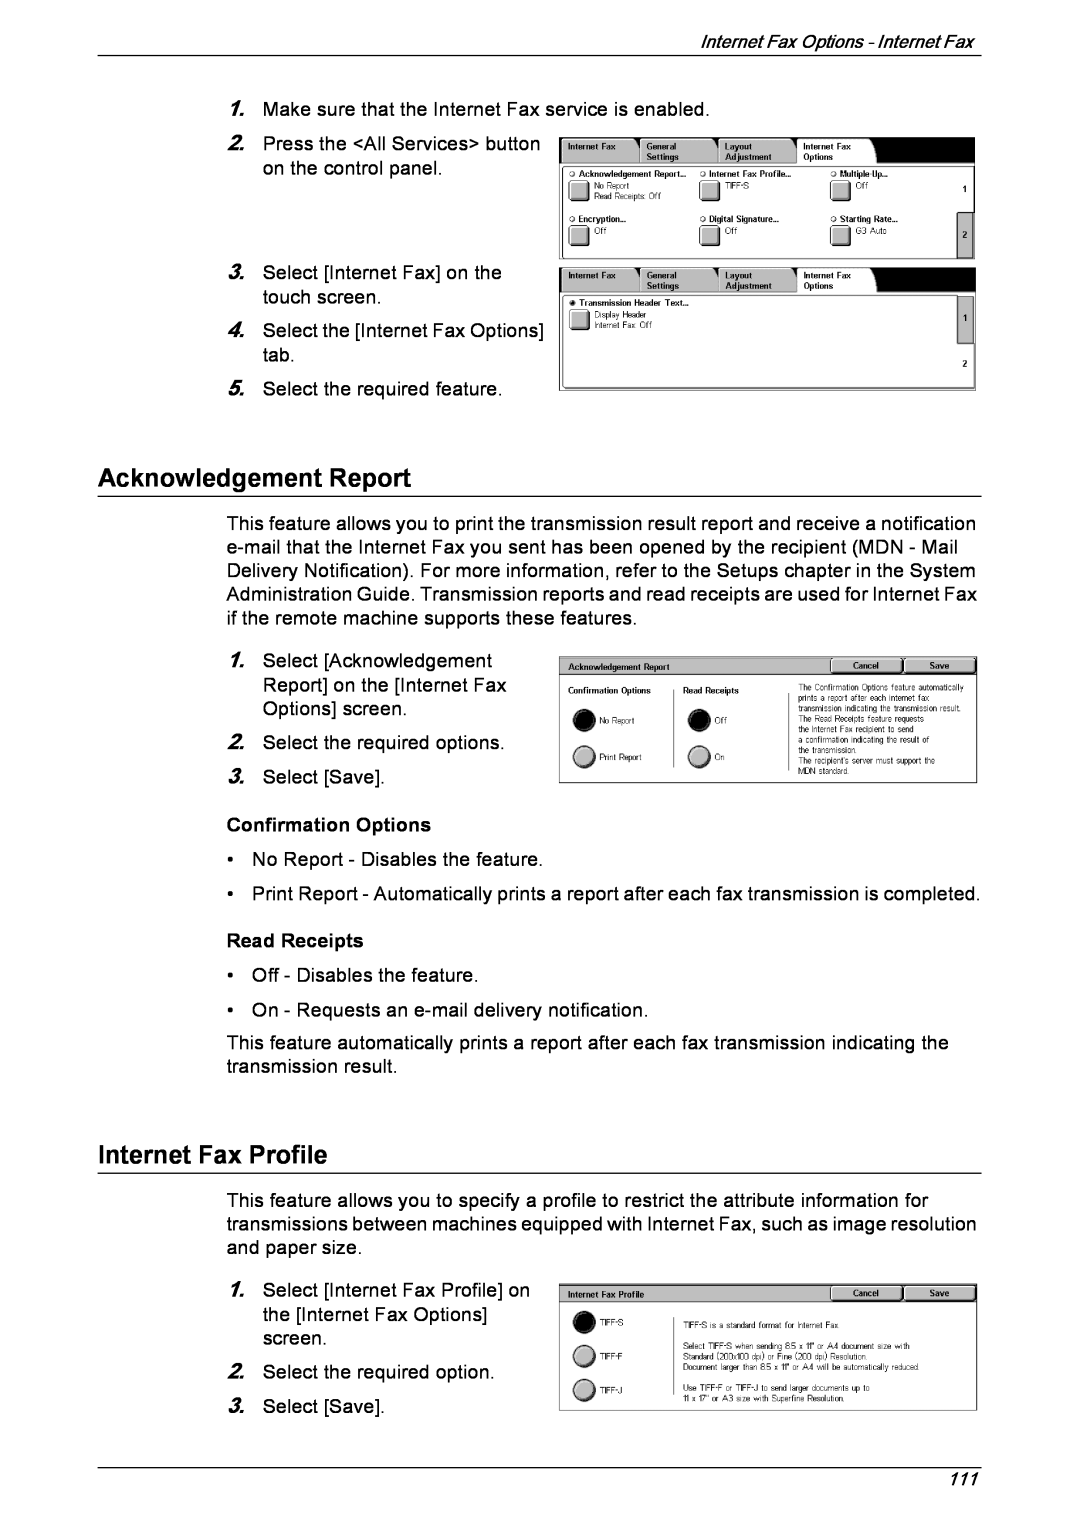 Xerox 5230 manual Acknowledgement Report, Internet Fax Profile, Confirmation Options, Read Receipts 